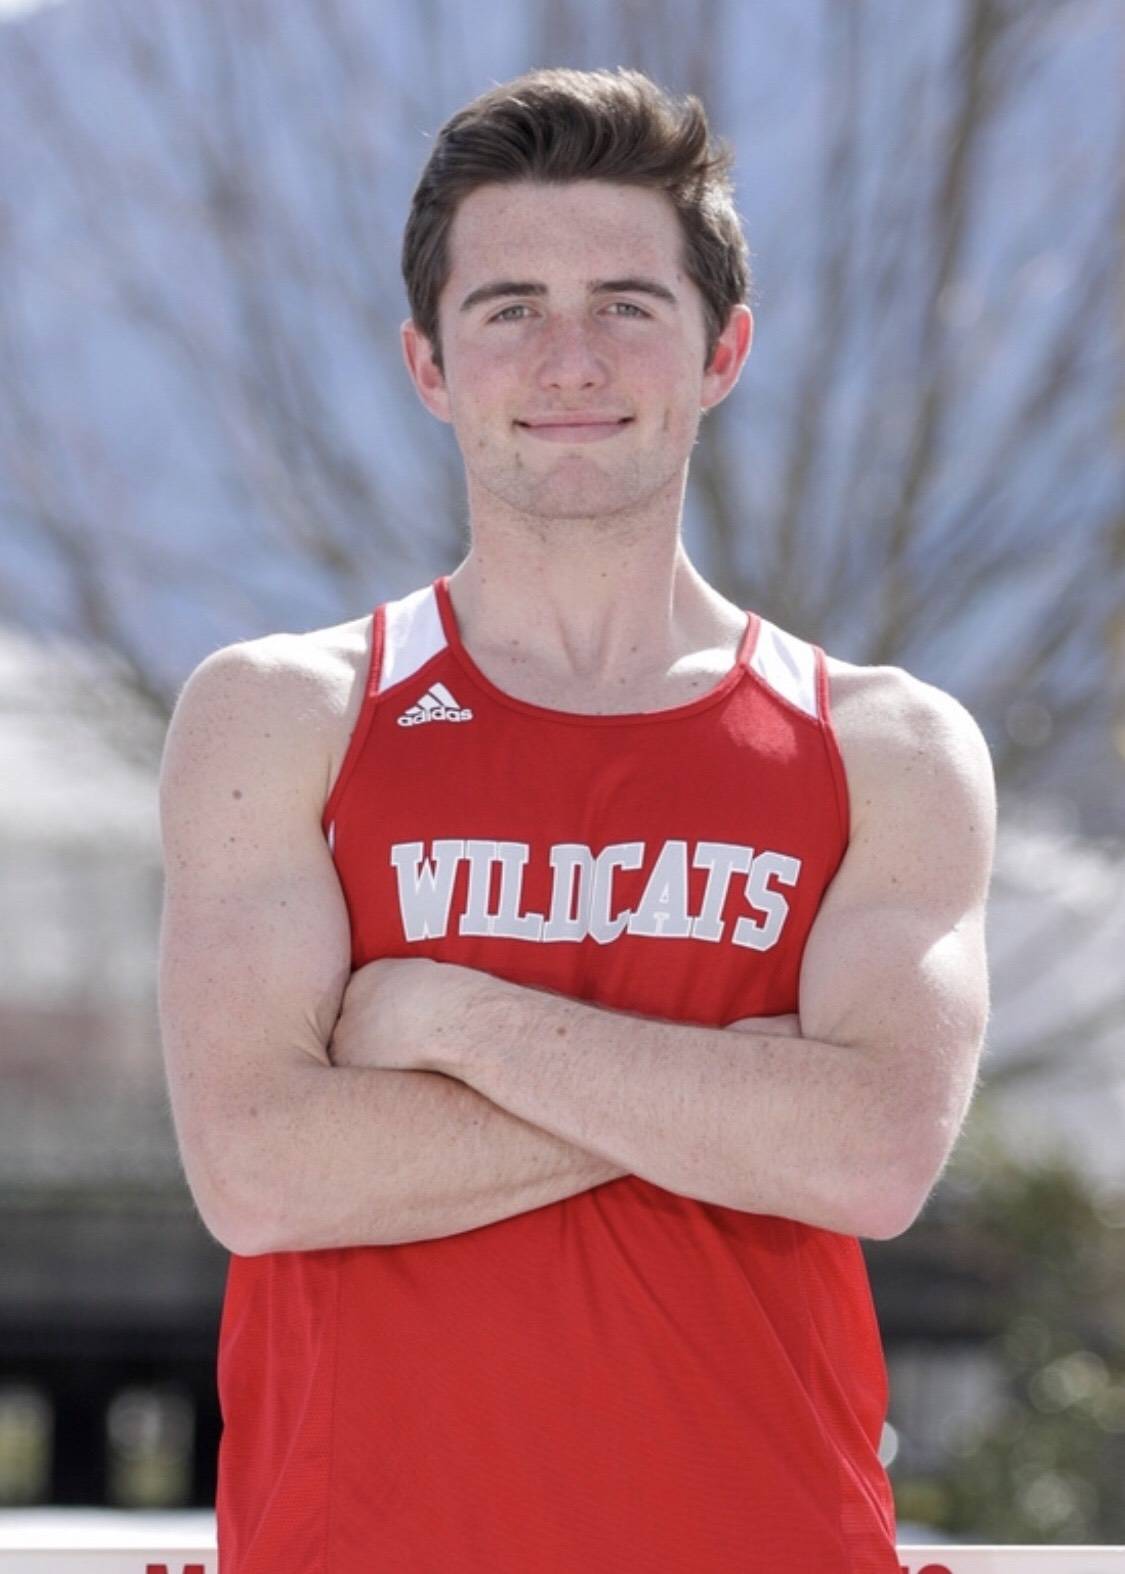 Mount Si 2019 graduate Spencer Sprague will run cross country and track at George Fox University in Newberg, Oregon. Photo courtesy of Robert Wachtendonk.